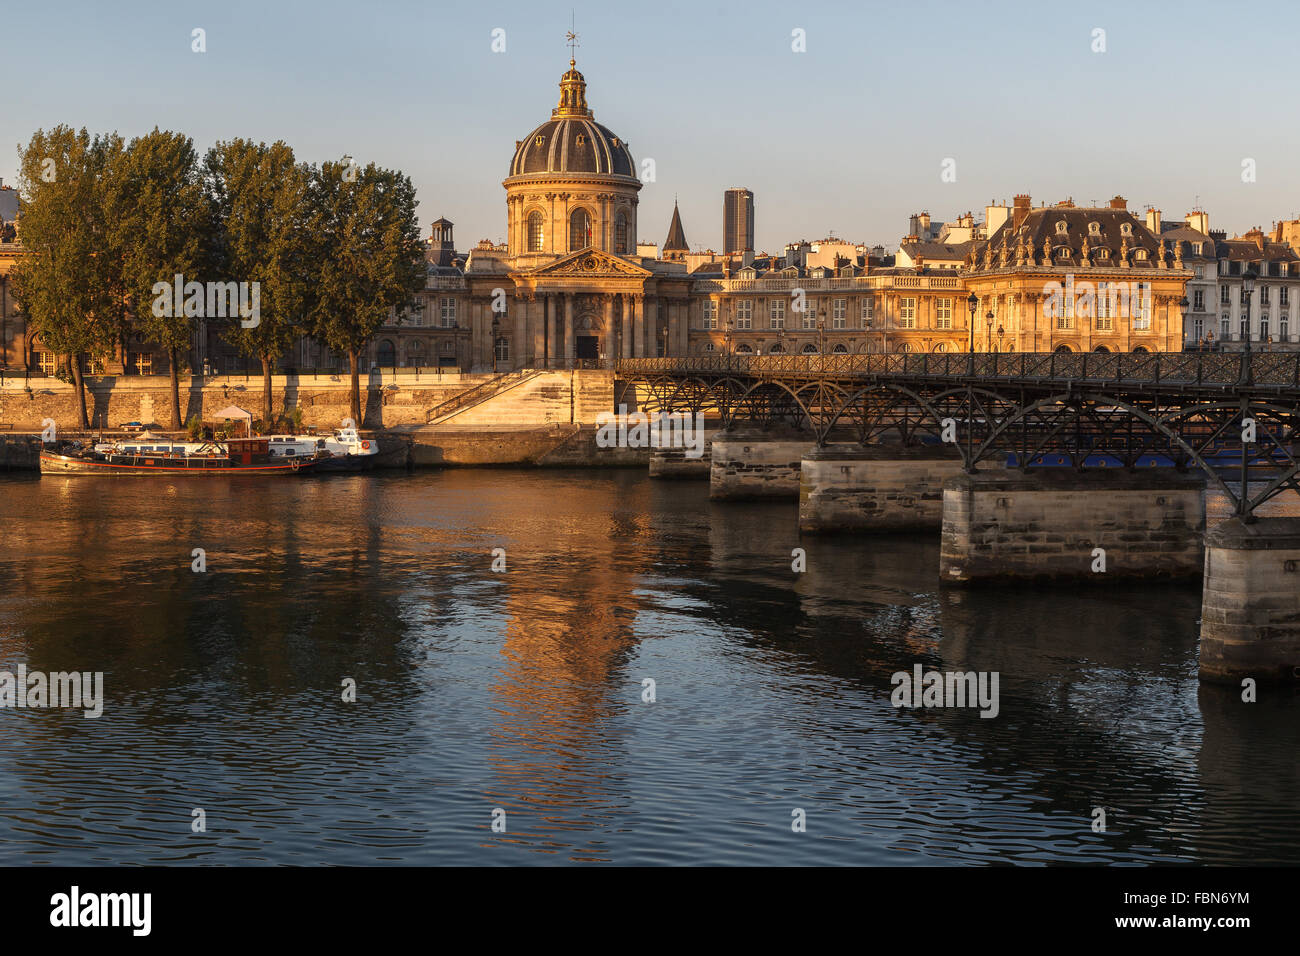 The French Institute, the Ponts des Arts and the Seine River at dawn, Paris, Ile de France, France. Stock Photo